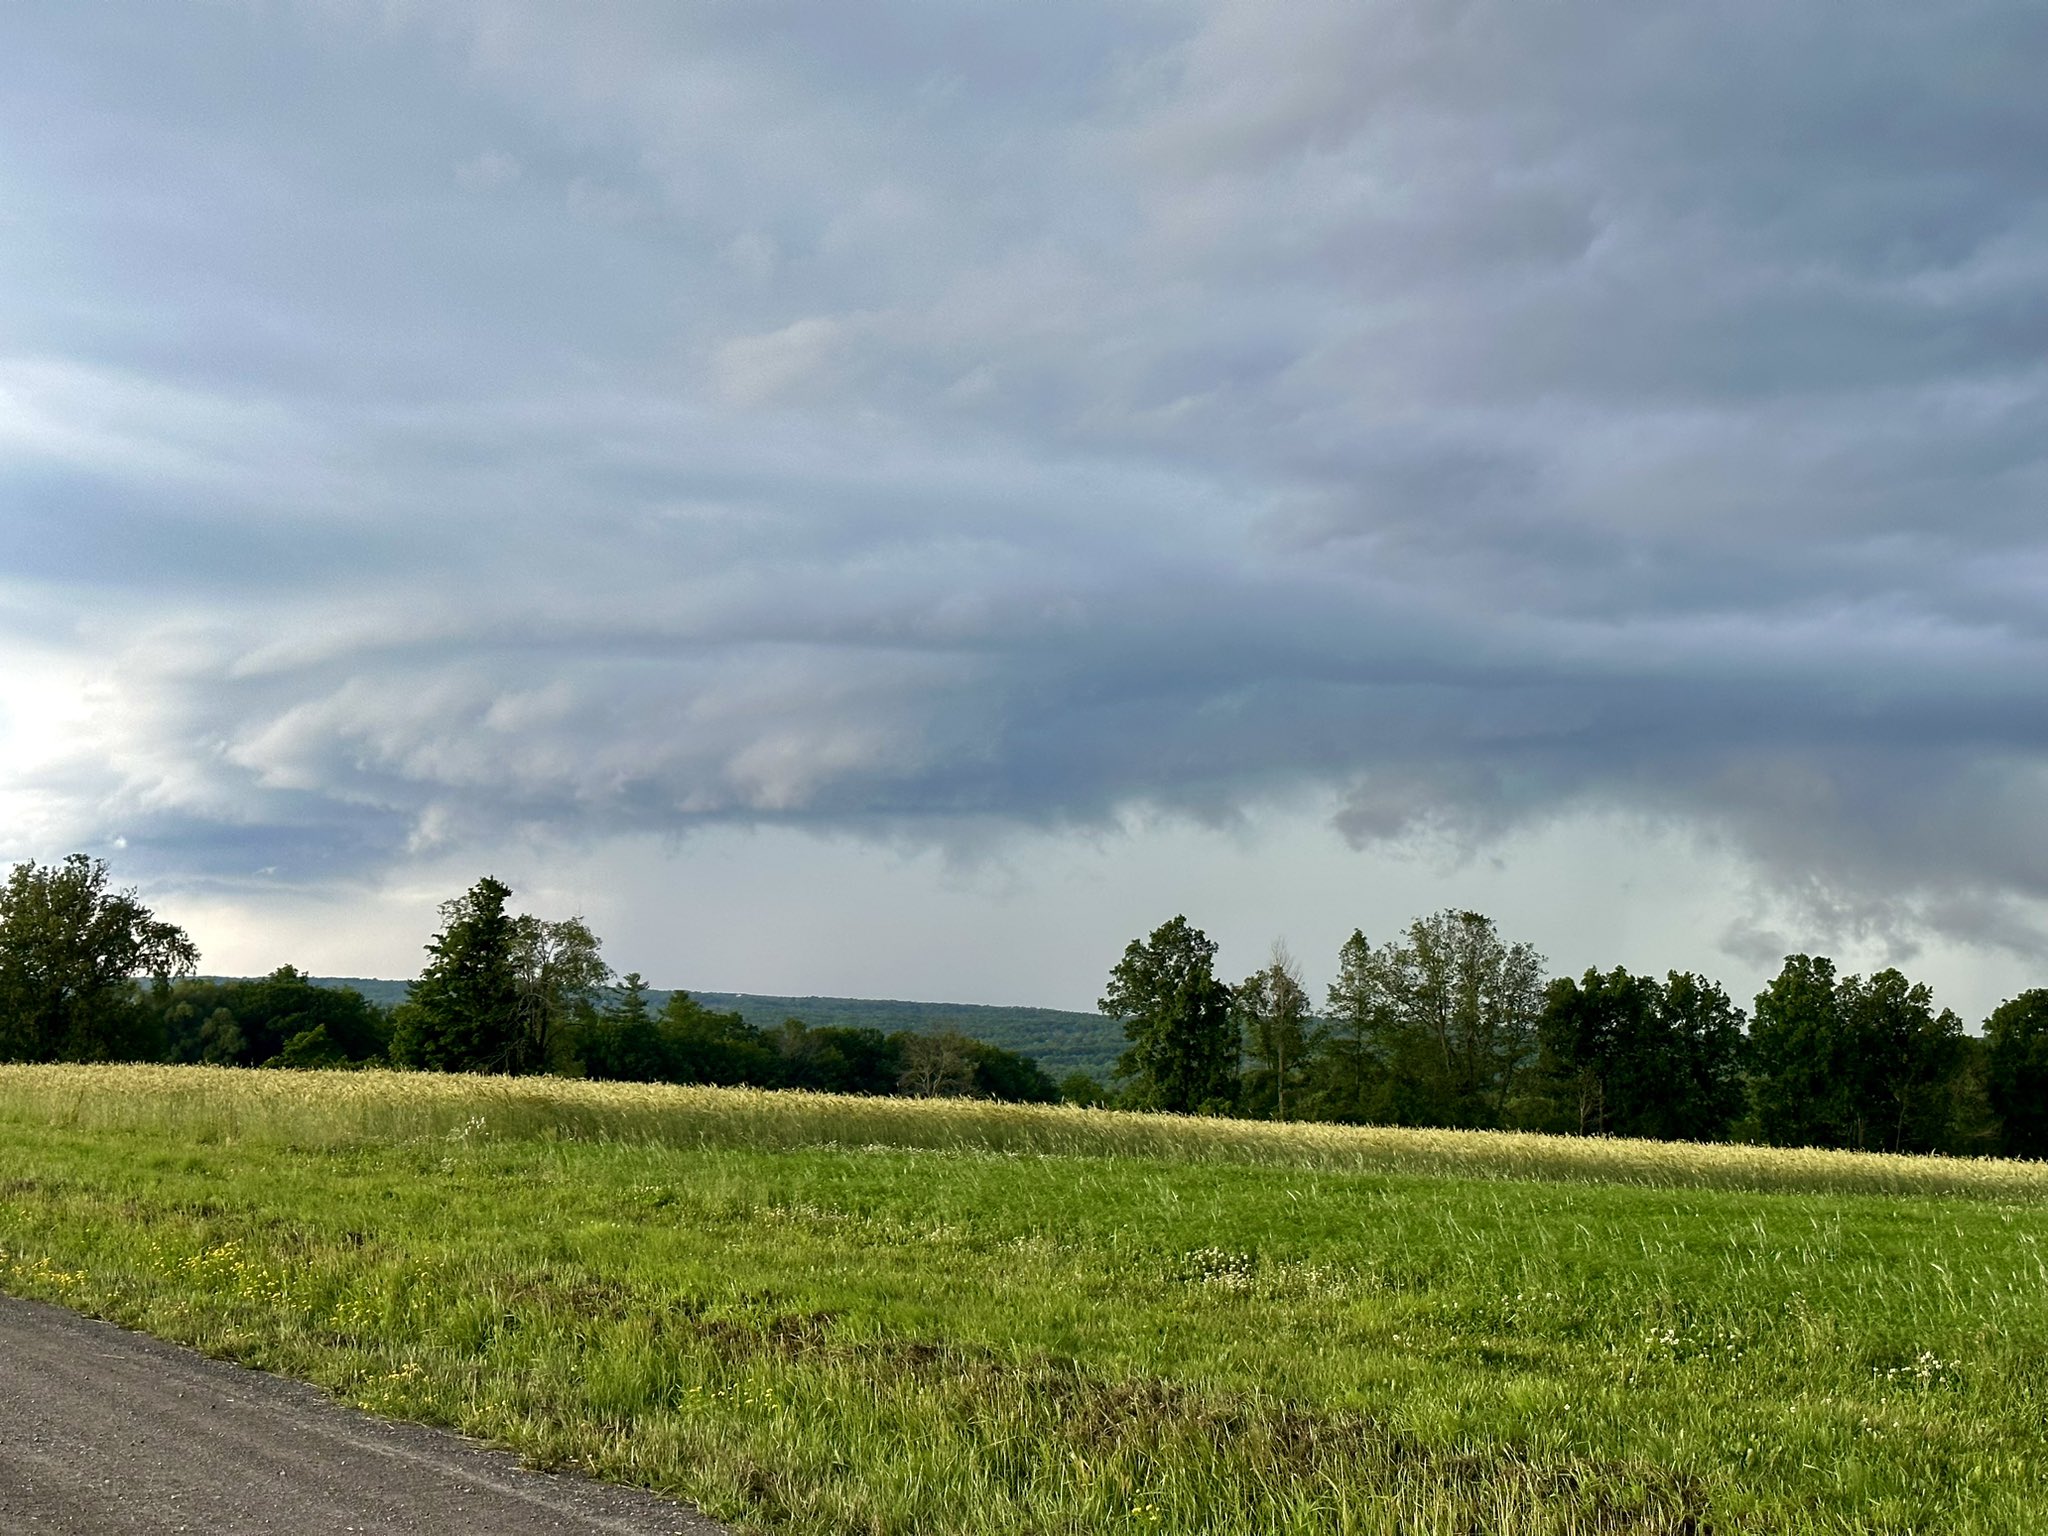 Severe thunderstorms bring heavy rain, hail and leave thousands without power across Finger Lakes